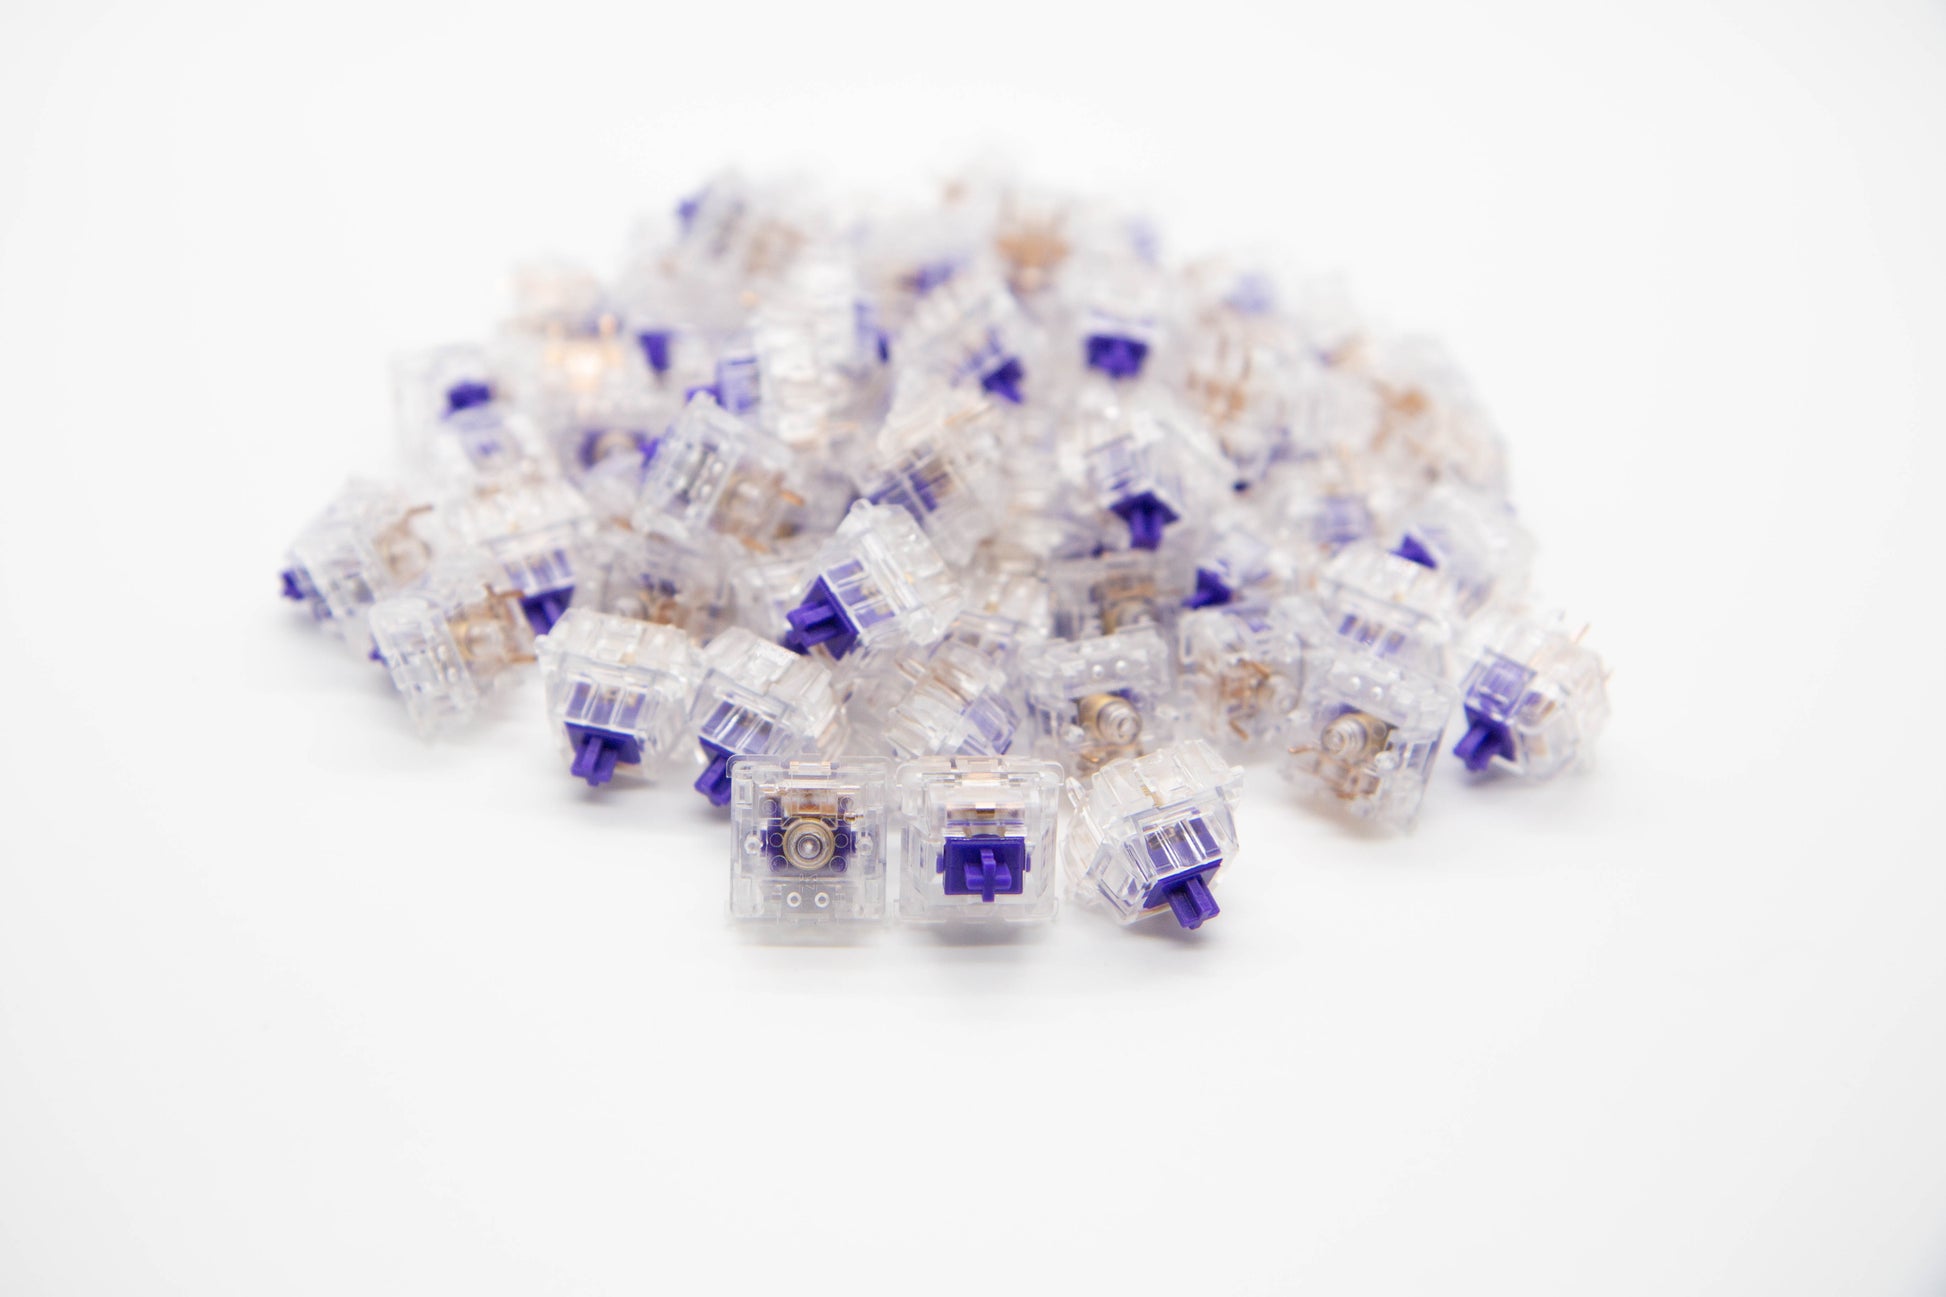 Close-up shot of a pile of Medium Tactile mechanical keyboard switches featuring transparent housing and dark purple stems